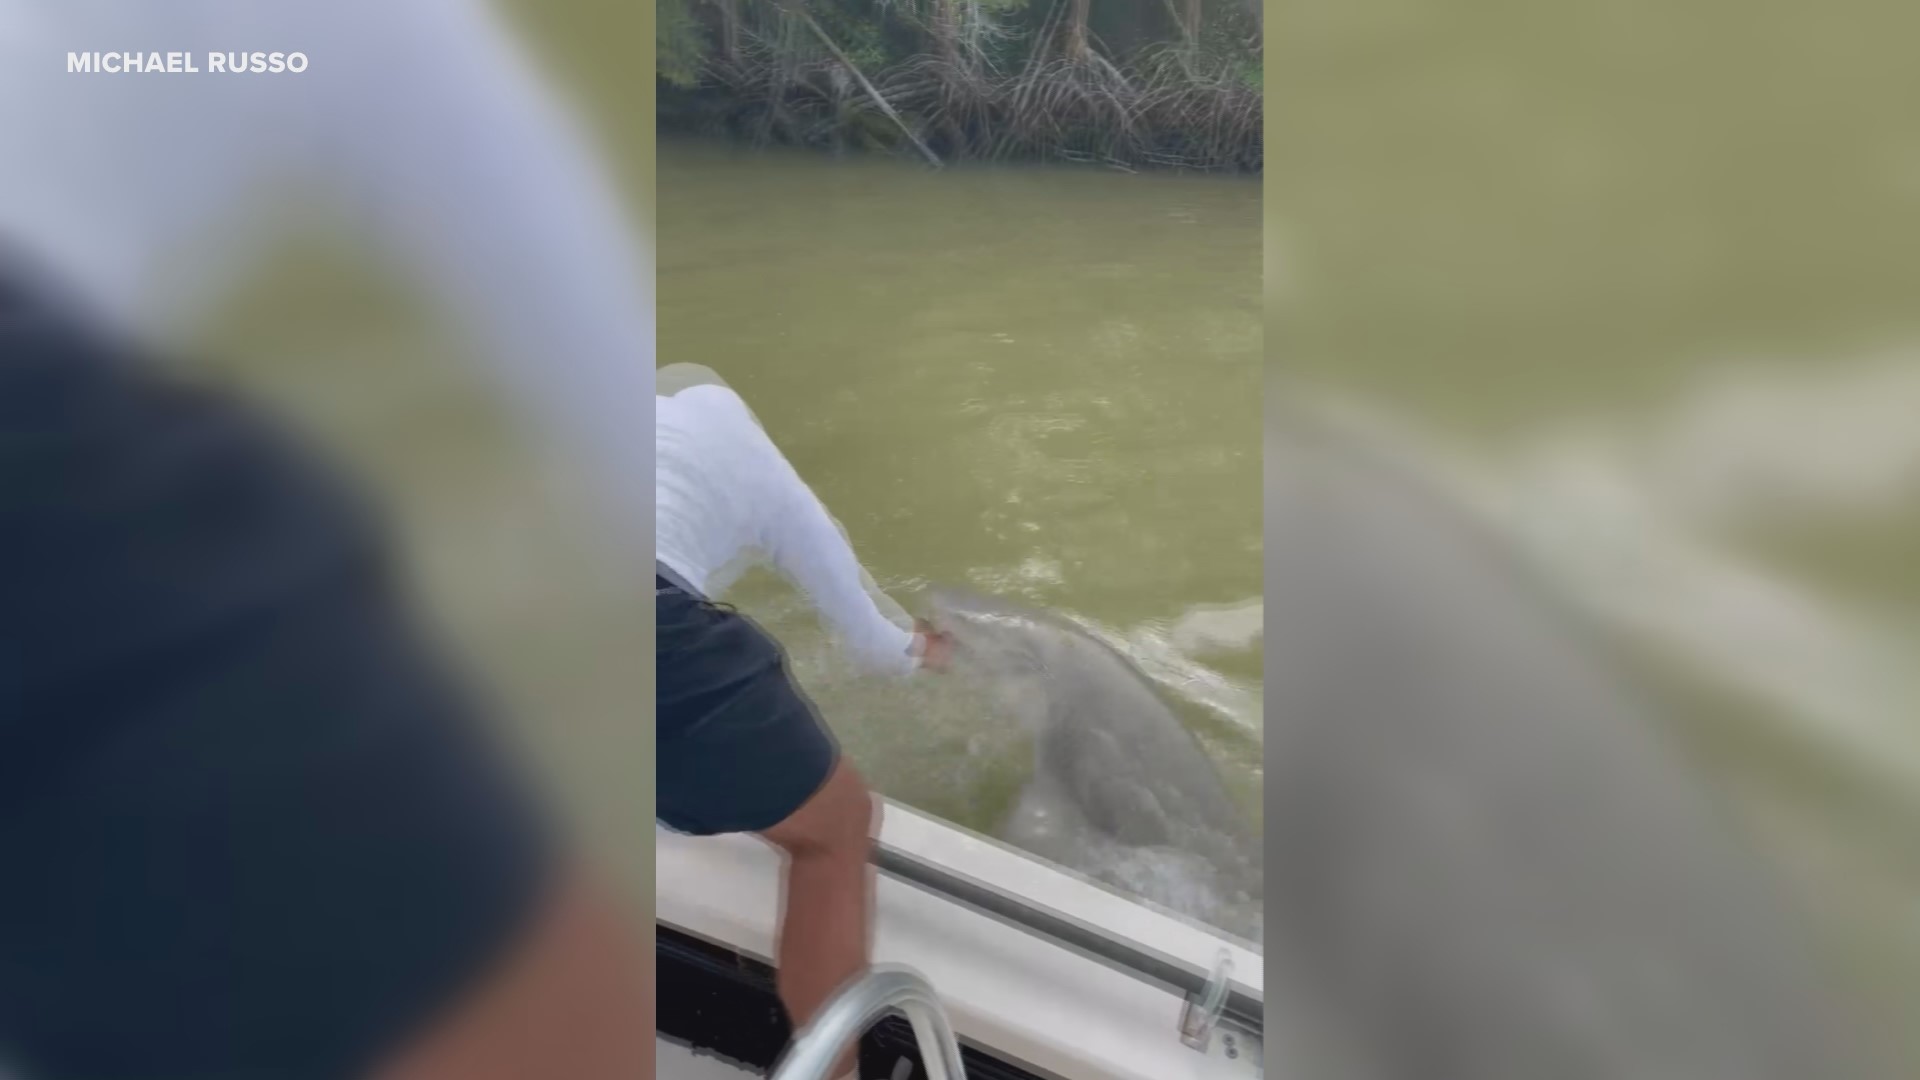 The man was fishing with friends when he stuck his hand in the water and was pulled into the water as the shark took a bite.